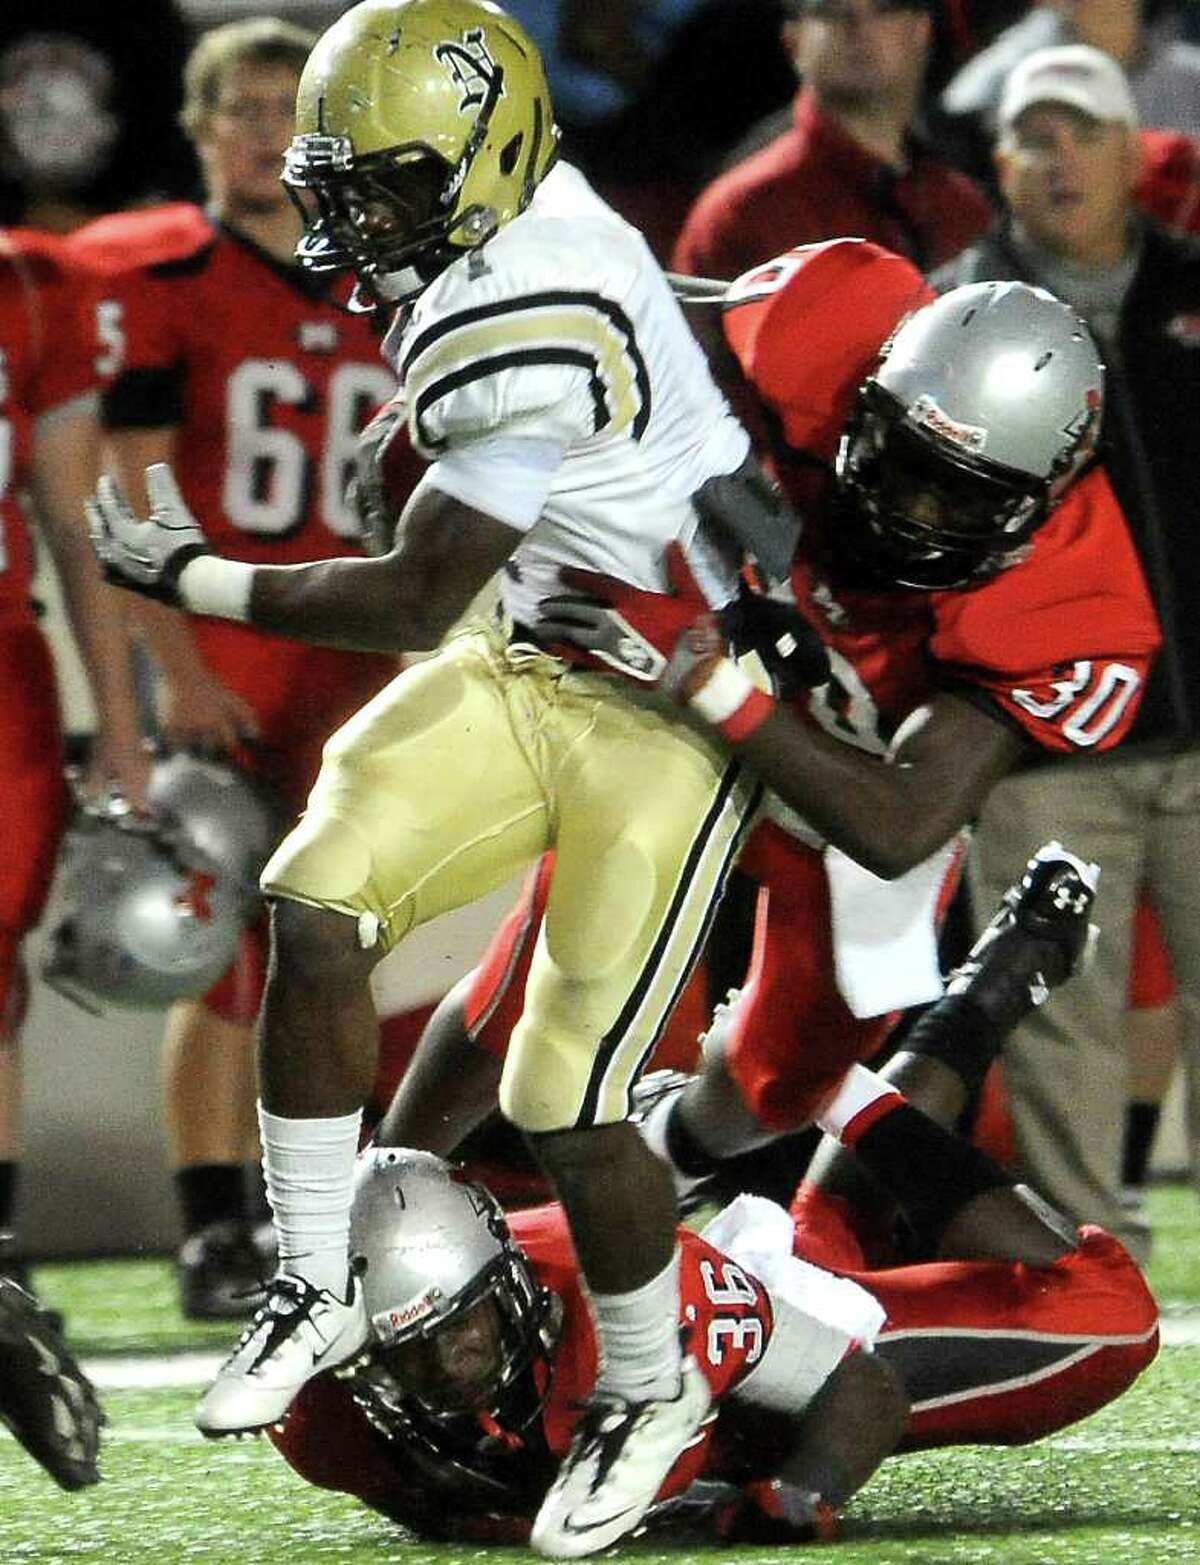 Nederland's Troy Benjamin is almost brought down by Goose Creek's Josh Mayes at the Provost Umphrey Stadium at Lamar University in Beaumont, Friday, November 11, 2011. Tammy McKinley/The Enterprise